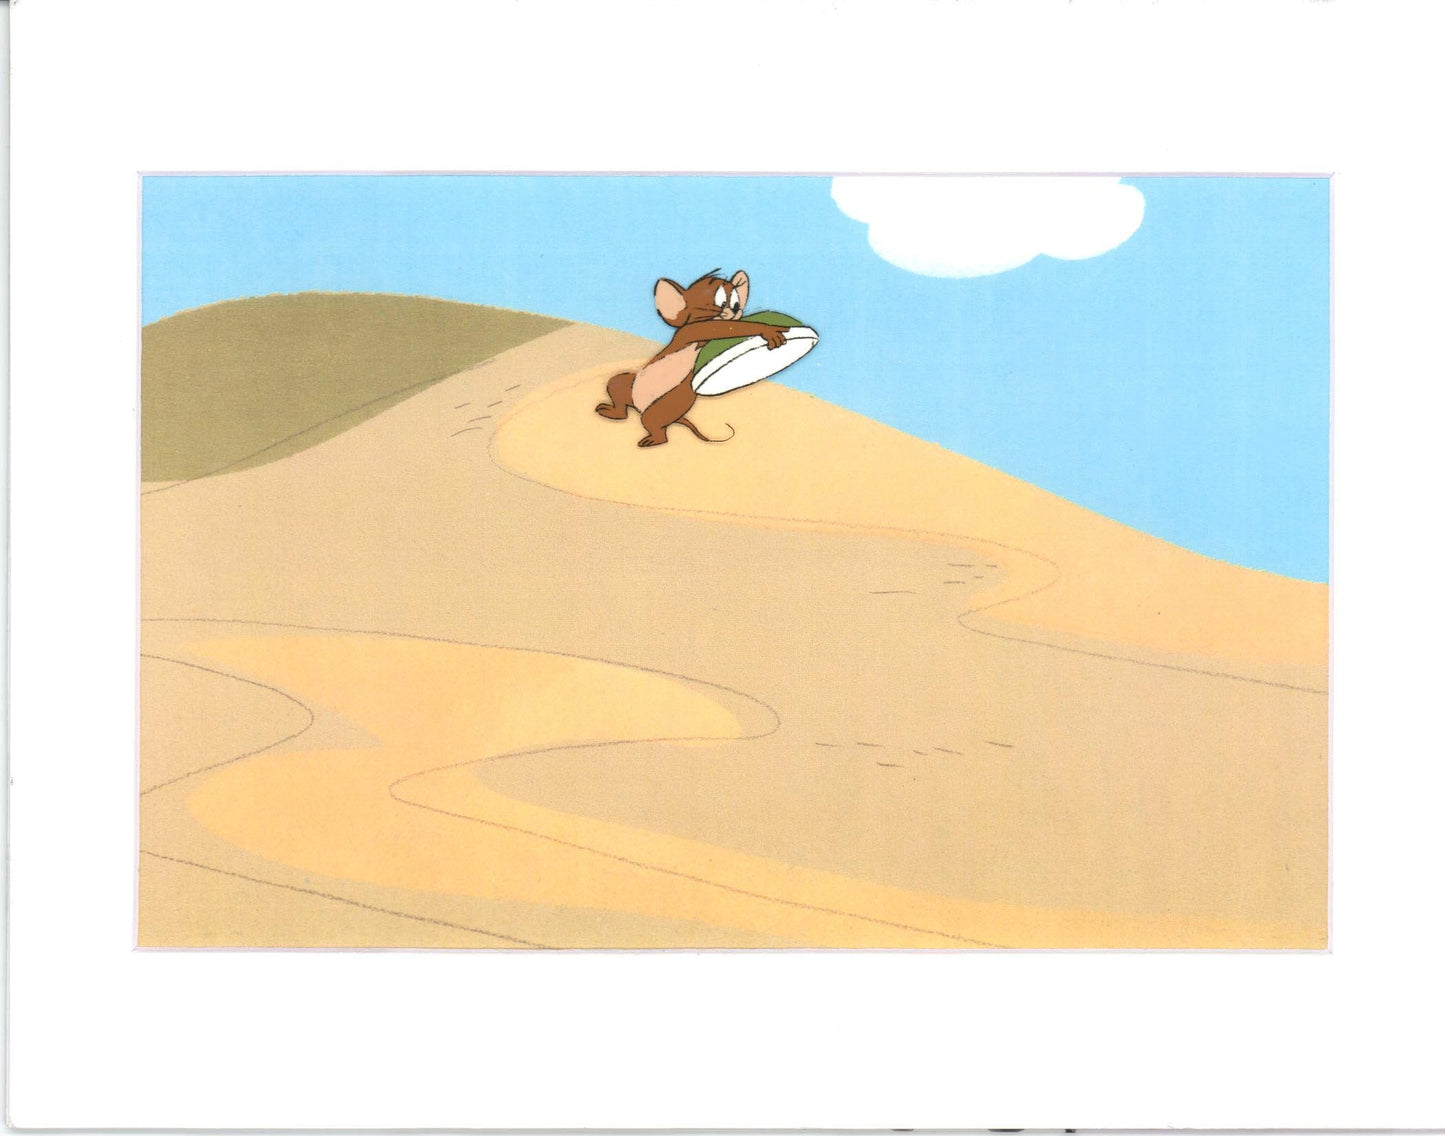 Tom & Jerry Original Production Animation Cel from Filmation 1980-82 b4557